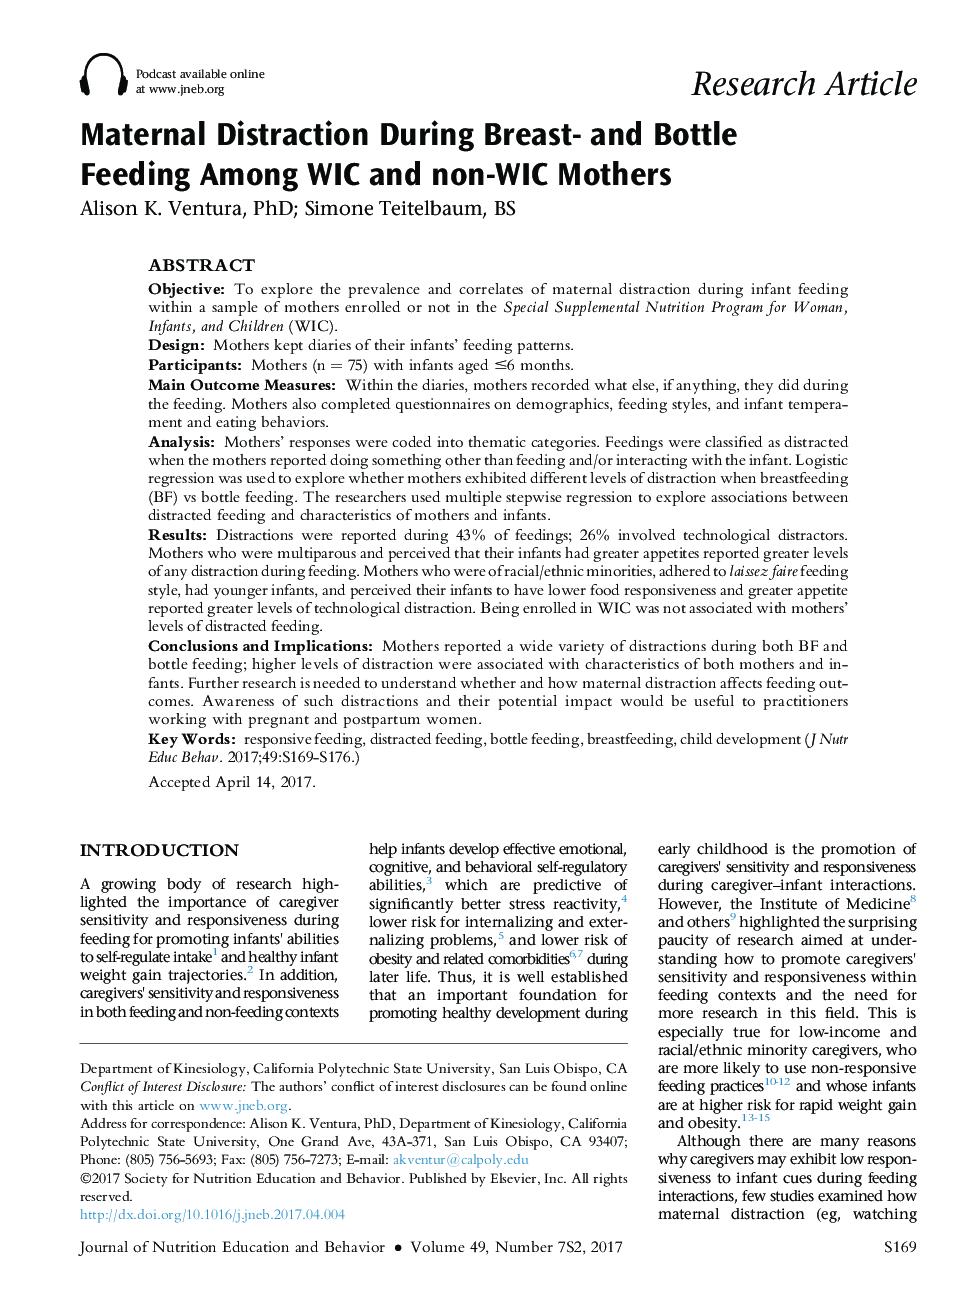 Maternal Distraction During Breast- and Bottle Feeding Among WIC and non-WIC Mothers